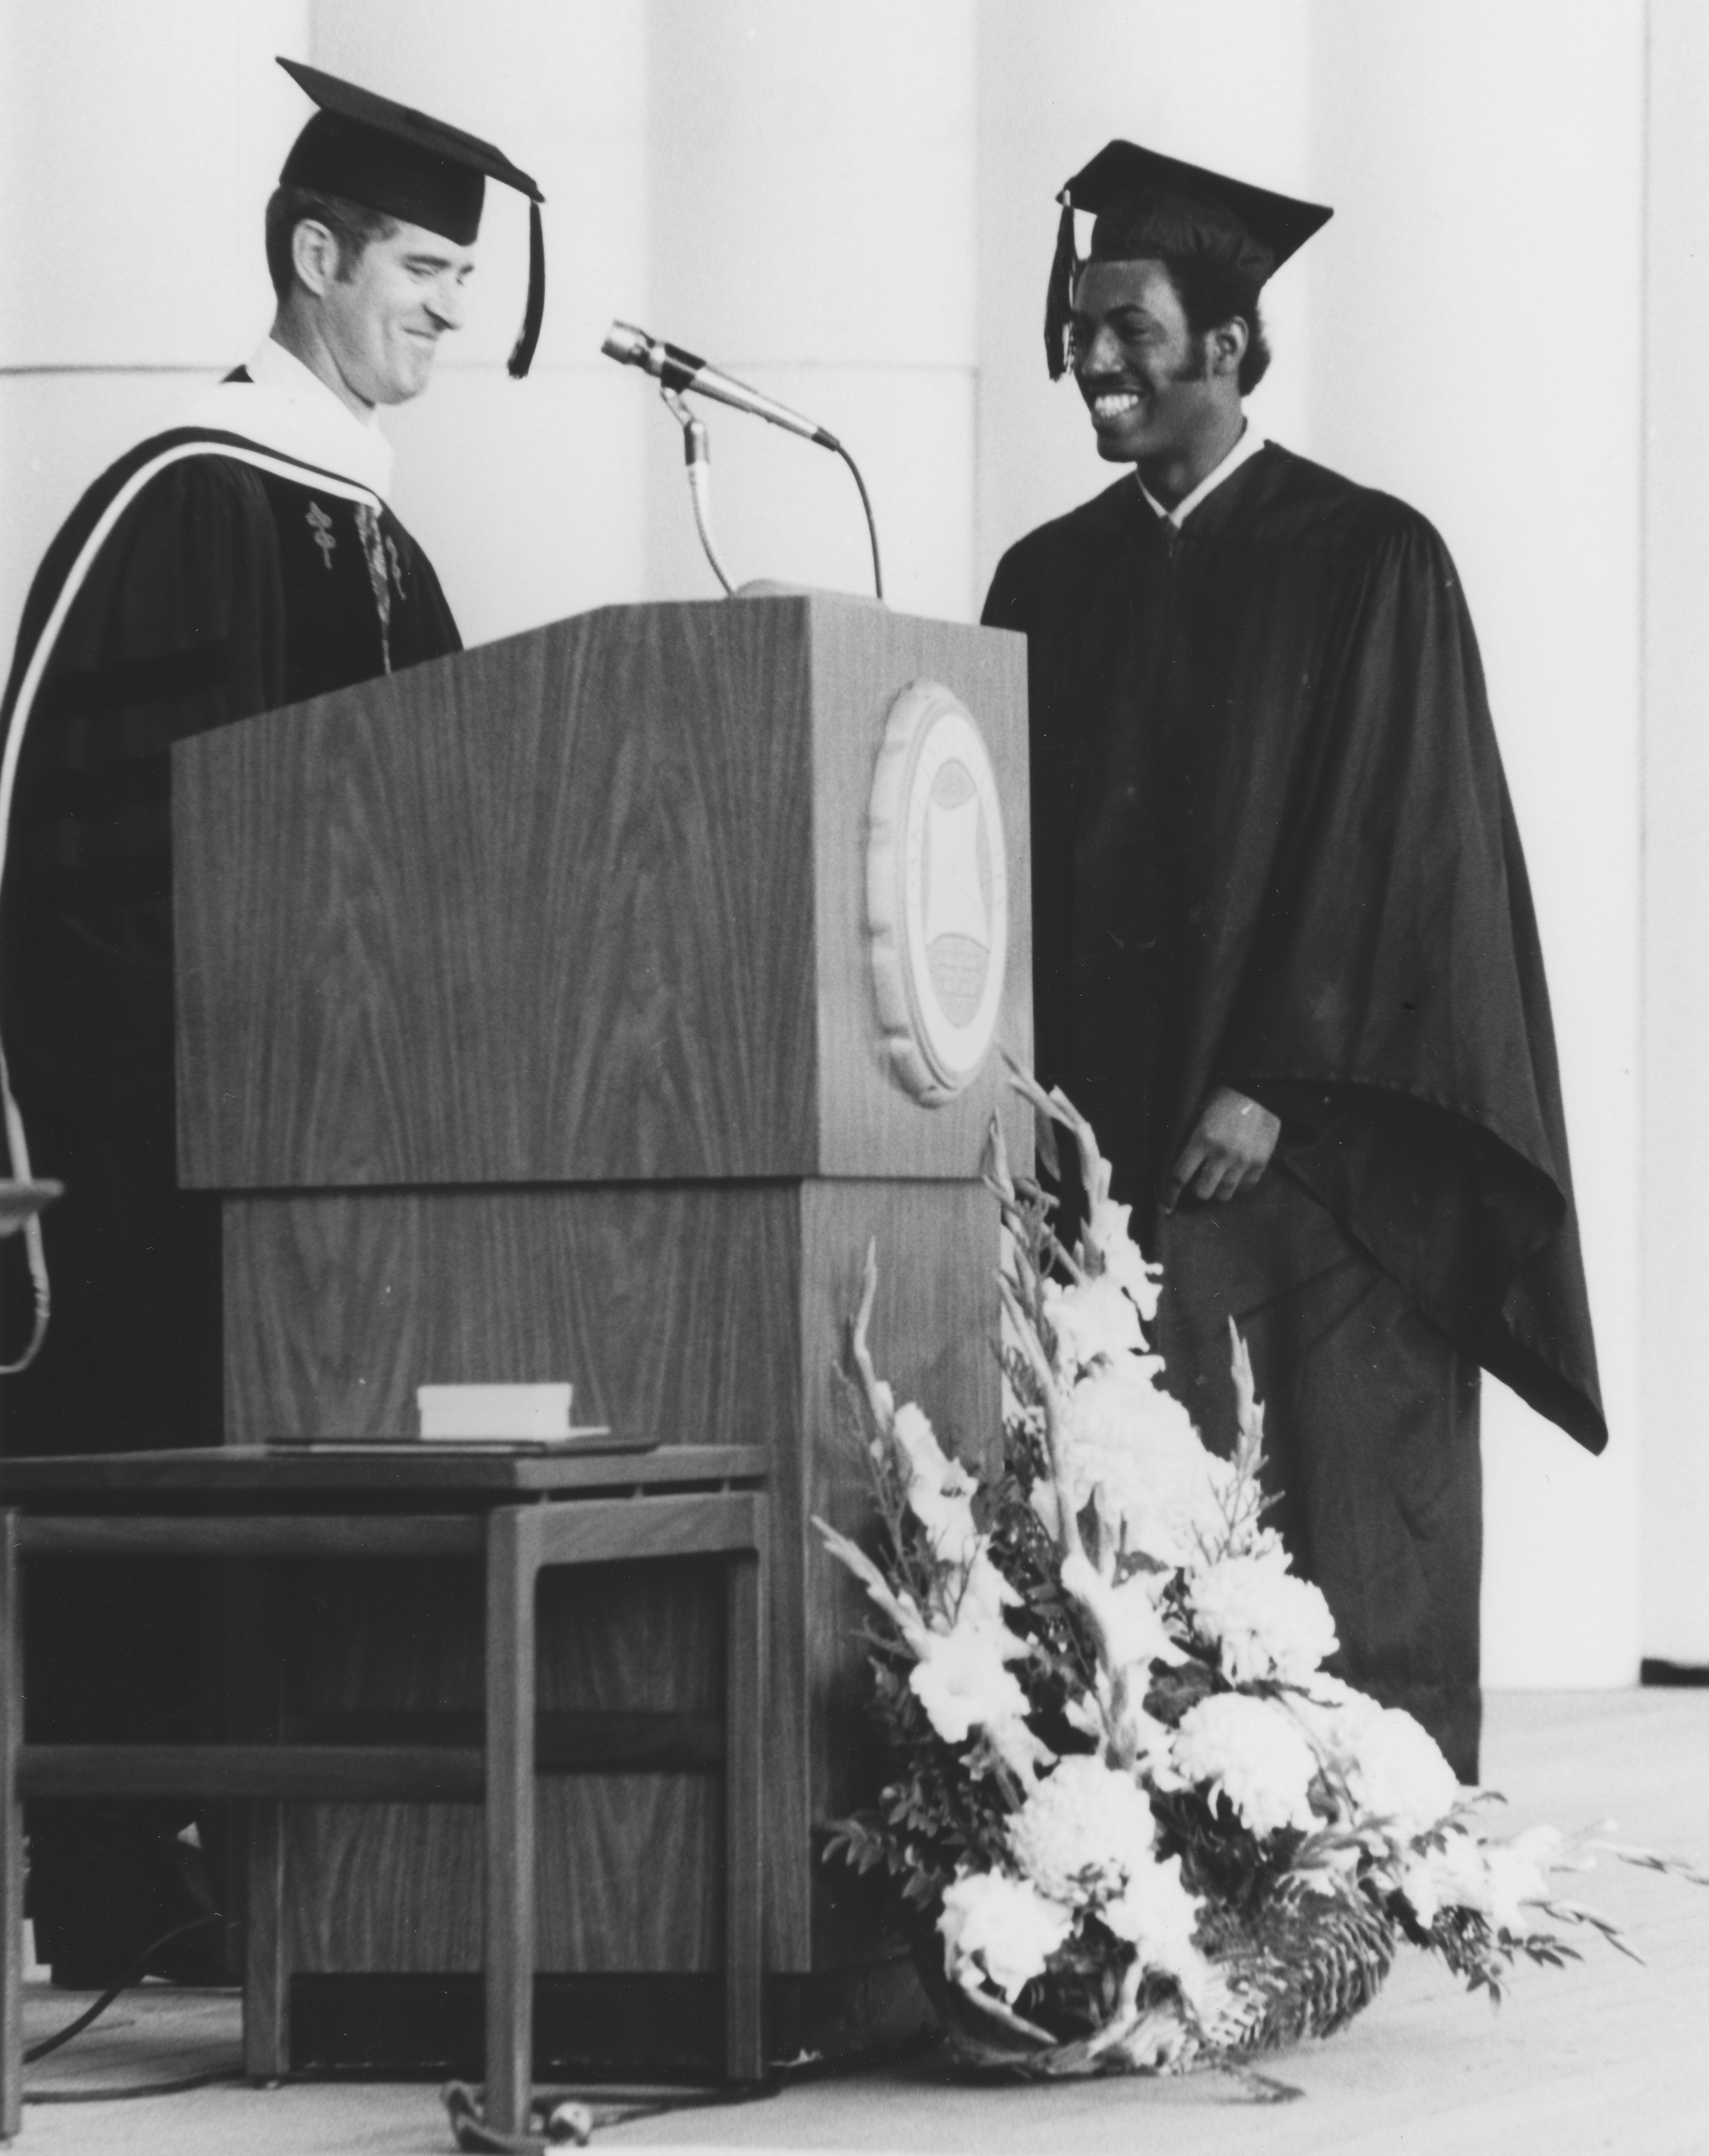 Earl Johnson receives his degree from President O'Dowd at Commencement